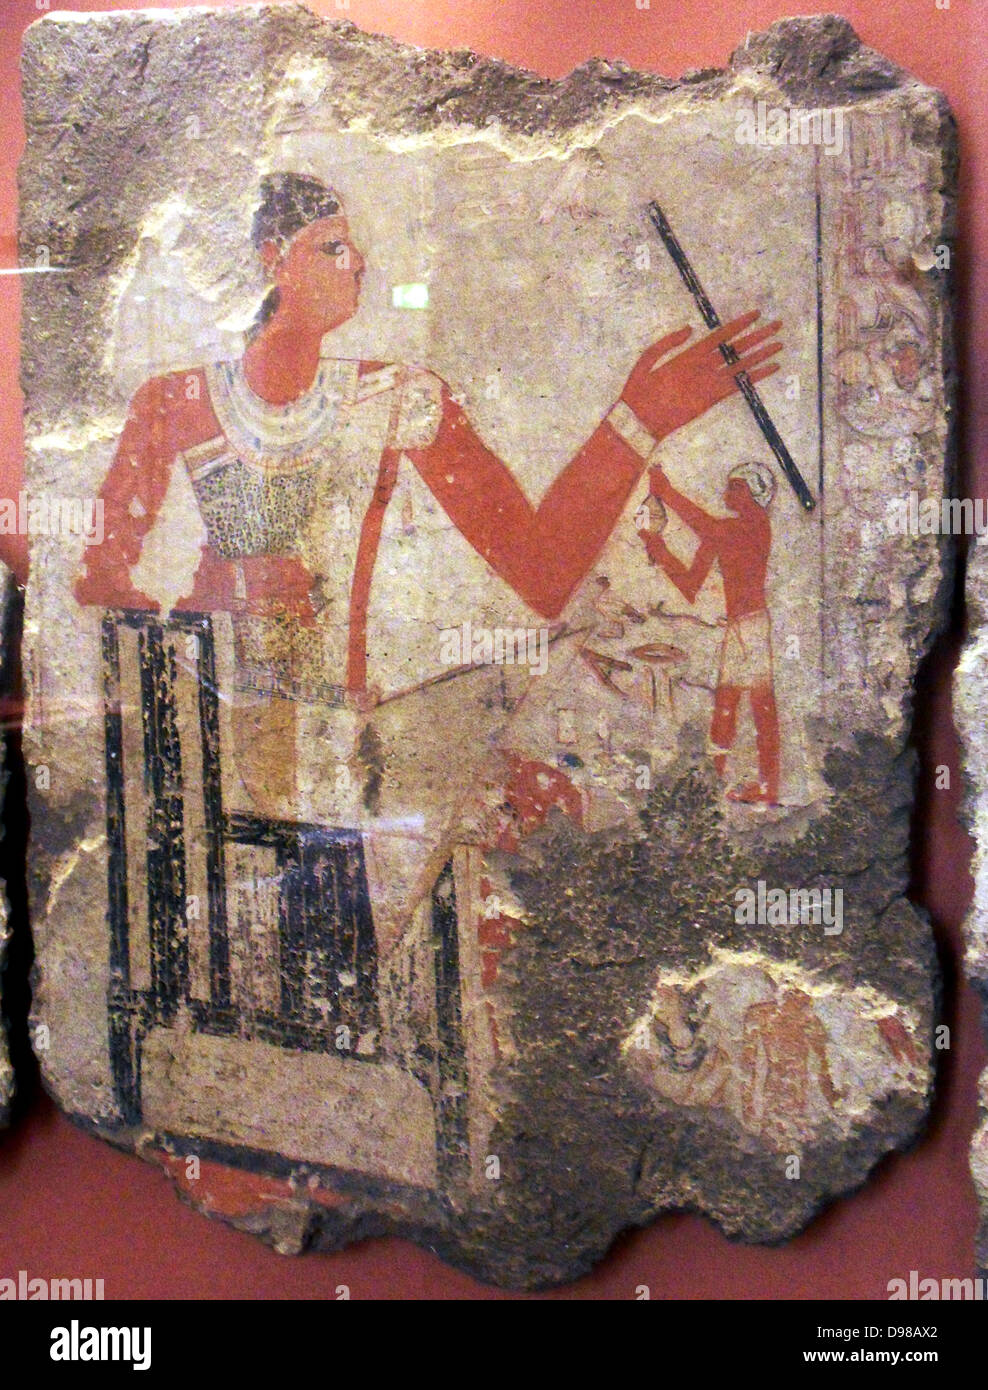 Tomb paintings Metchetchi to 2350 BC (early 6th dynasty) at Saqqara? Mud plaster and painted Stock Photo